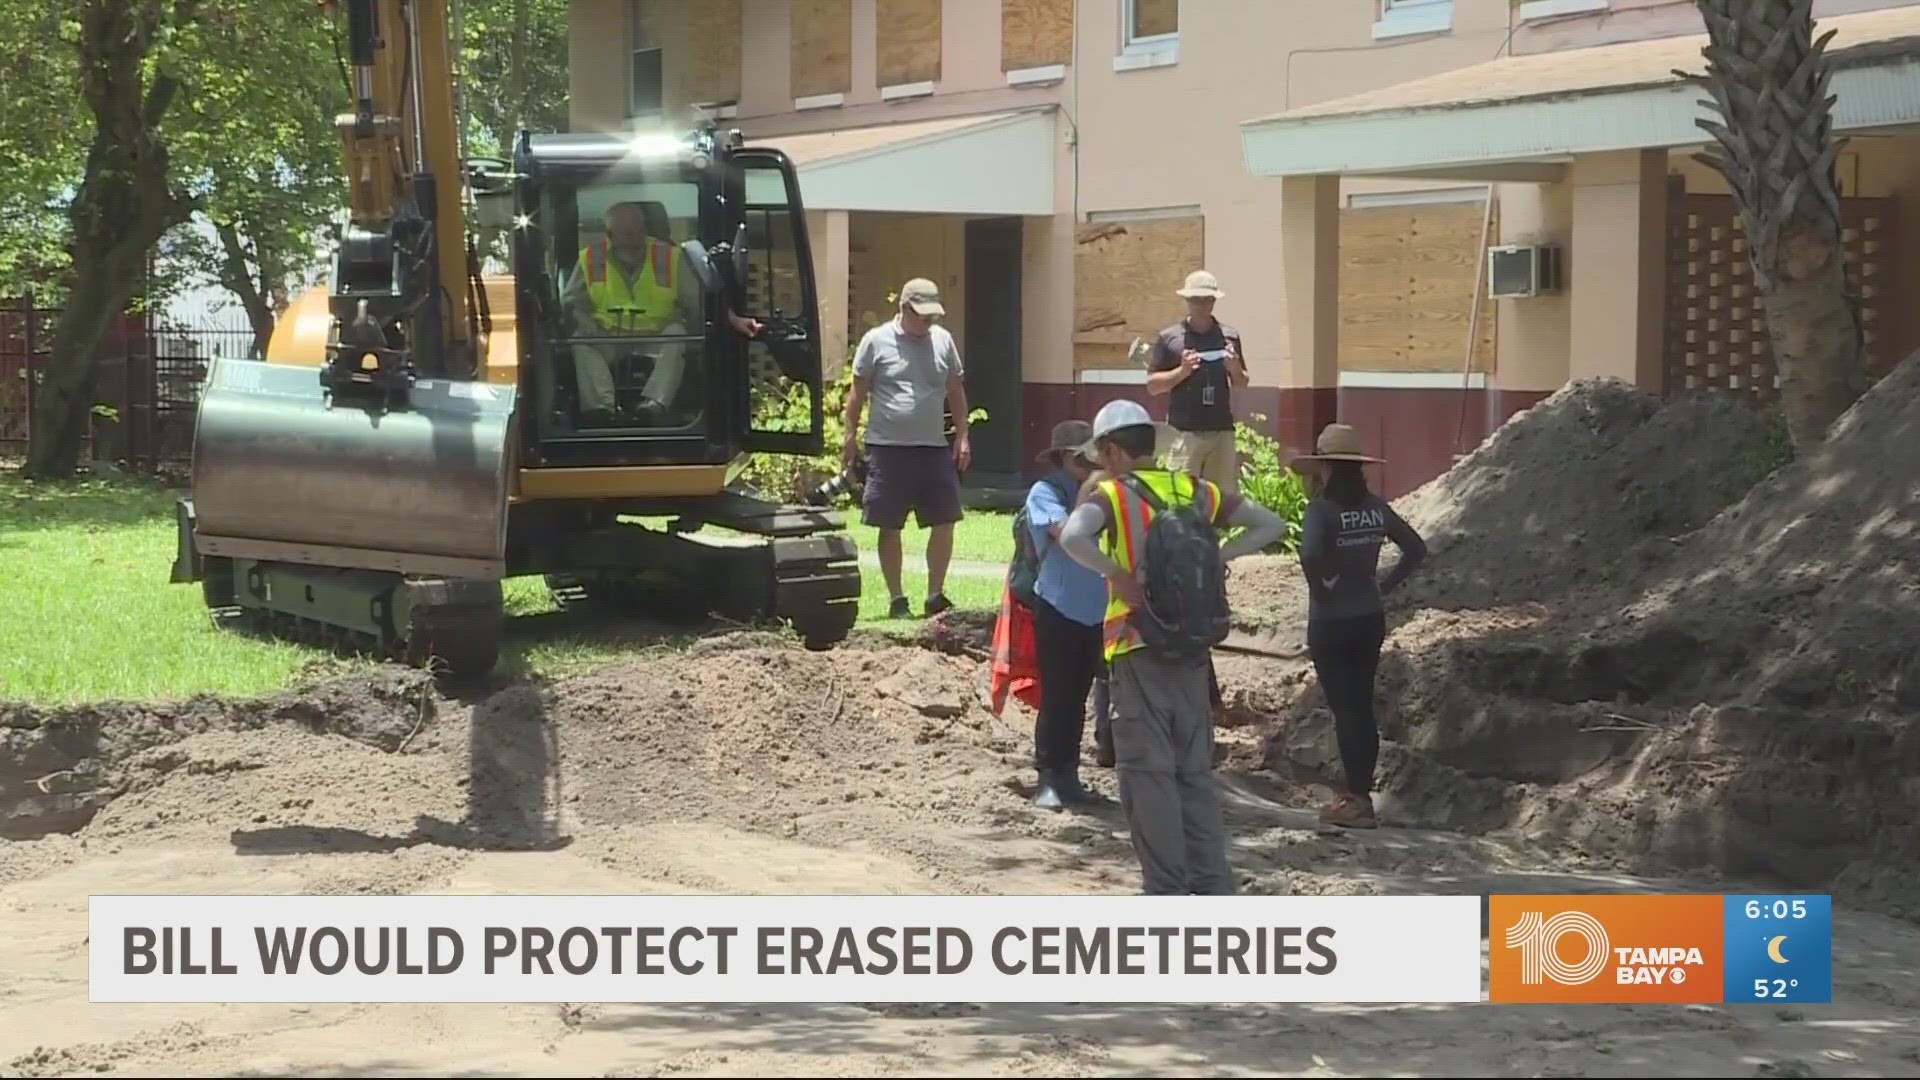 Hundreds of graves have been found under schools, apartments and businesses across the Tampa Bay area.